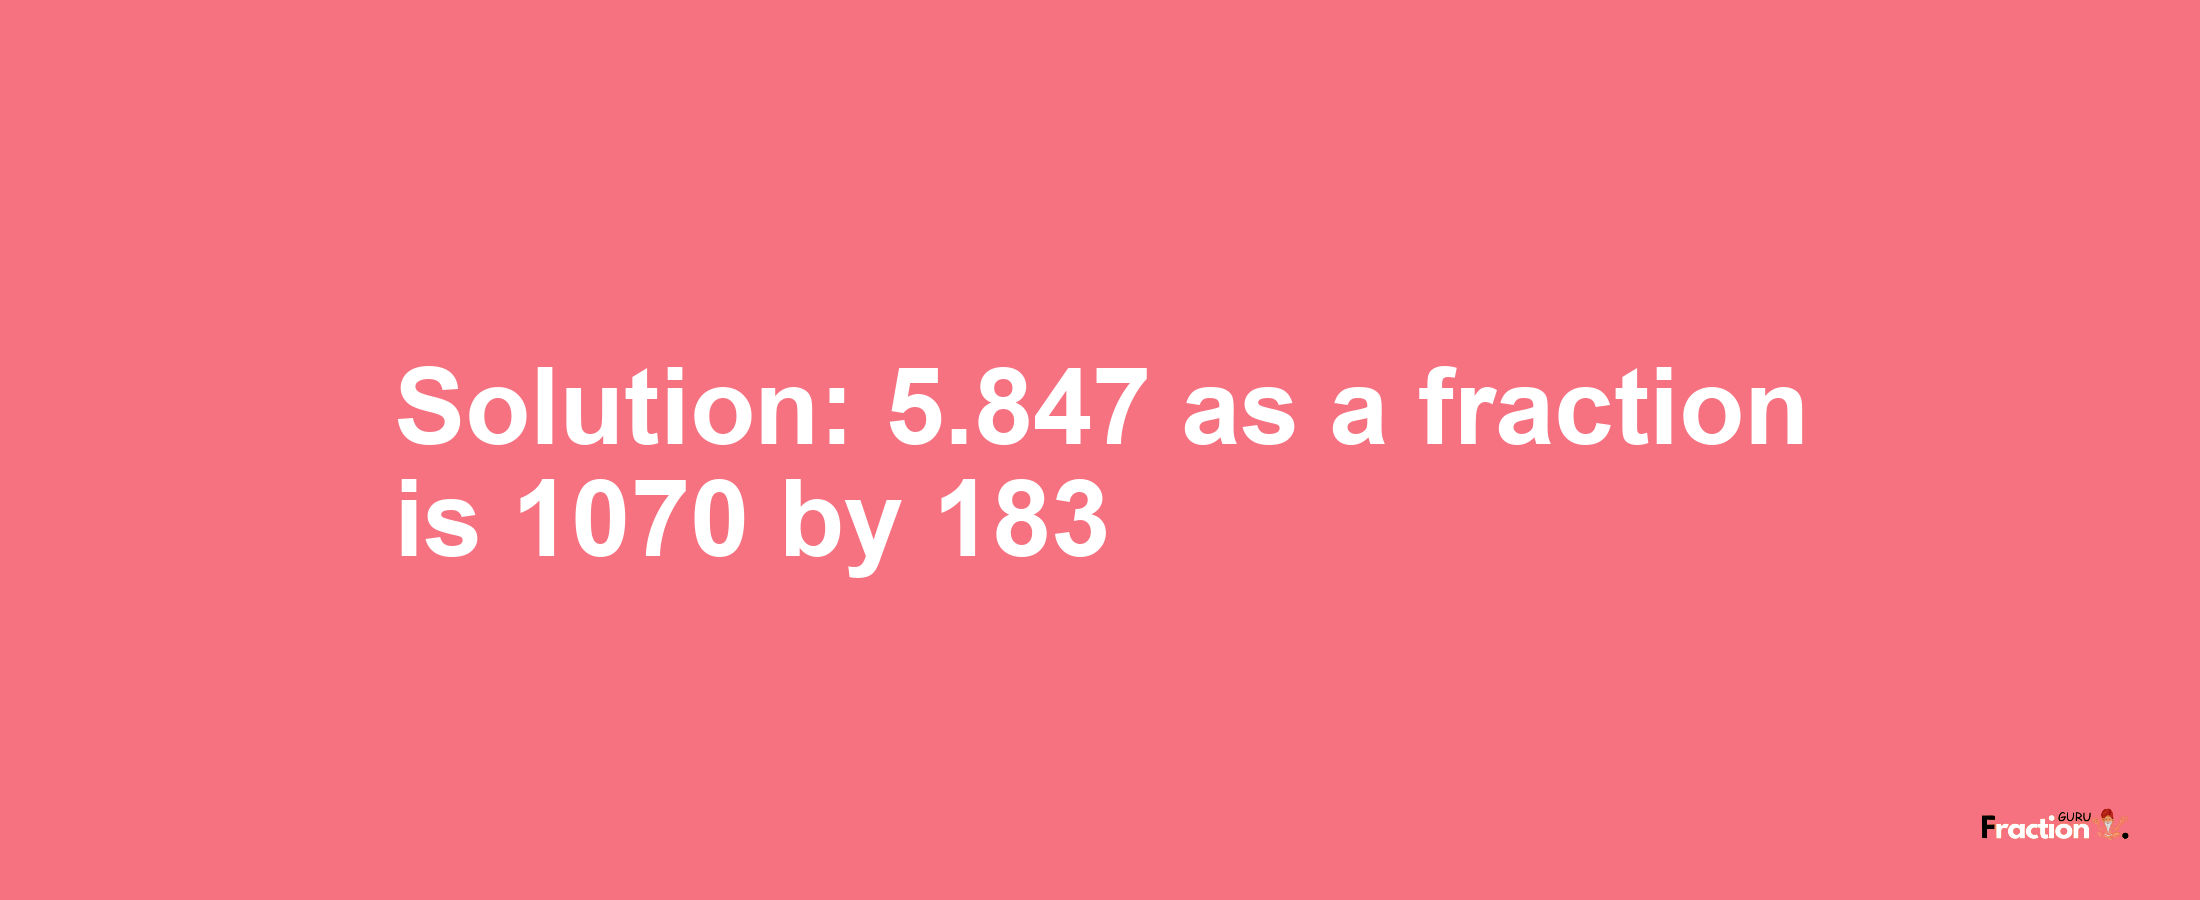 Solution:5.847 as a fraction is 1070/183